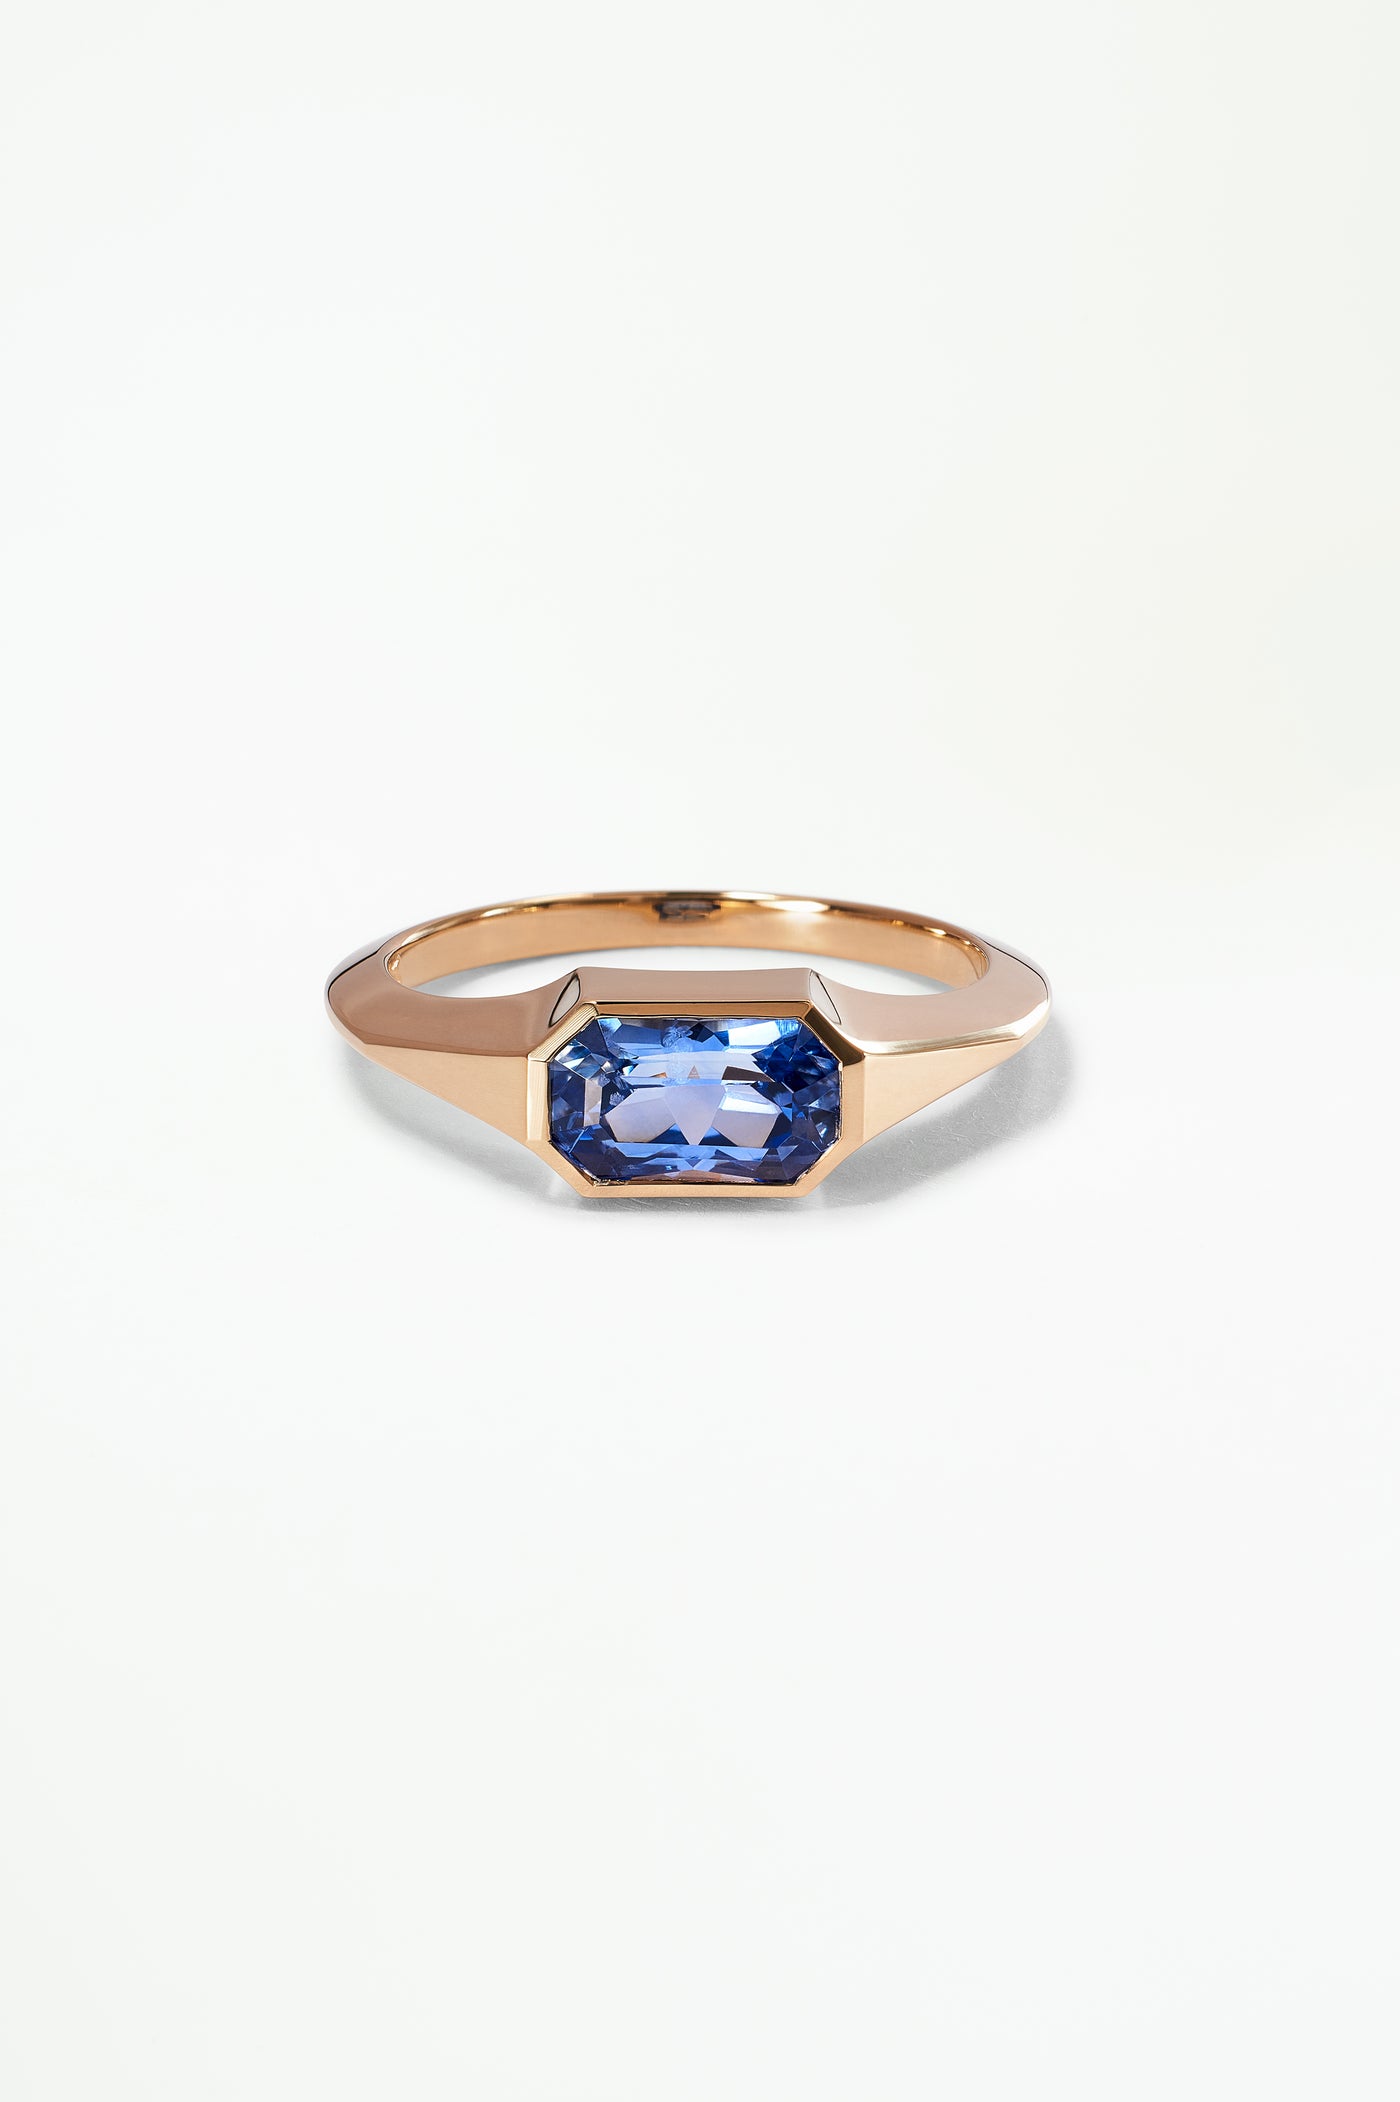 One of a Kind Fancy Mixed Cut Sapphire Signet Ring No. 51